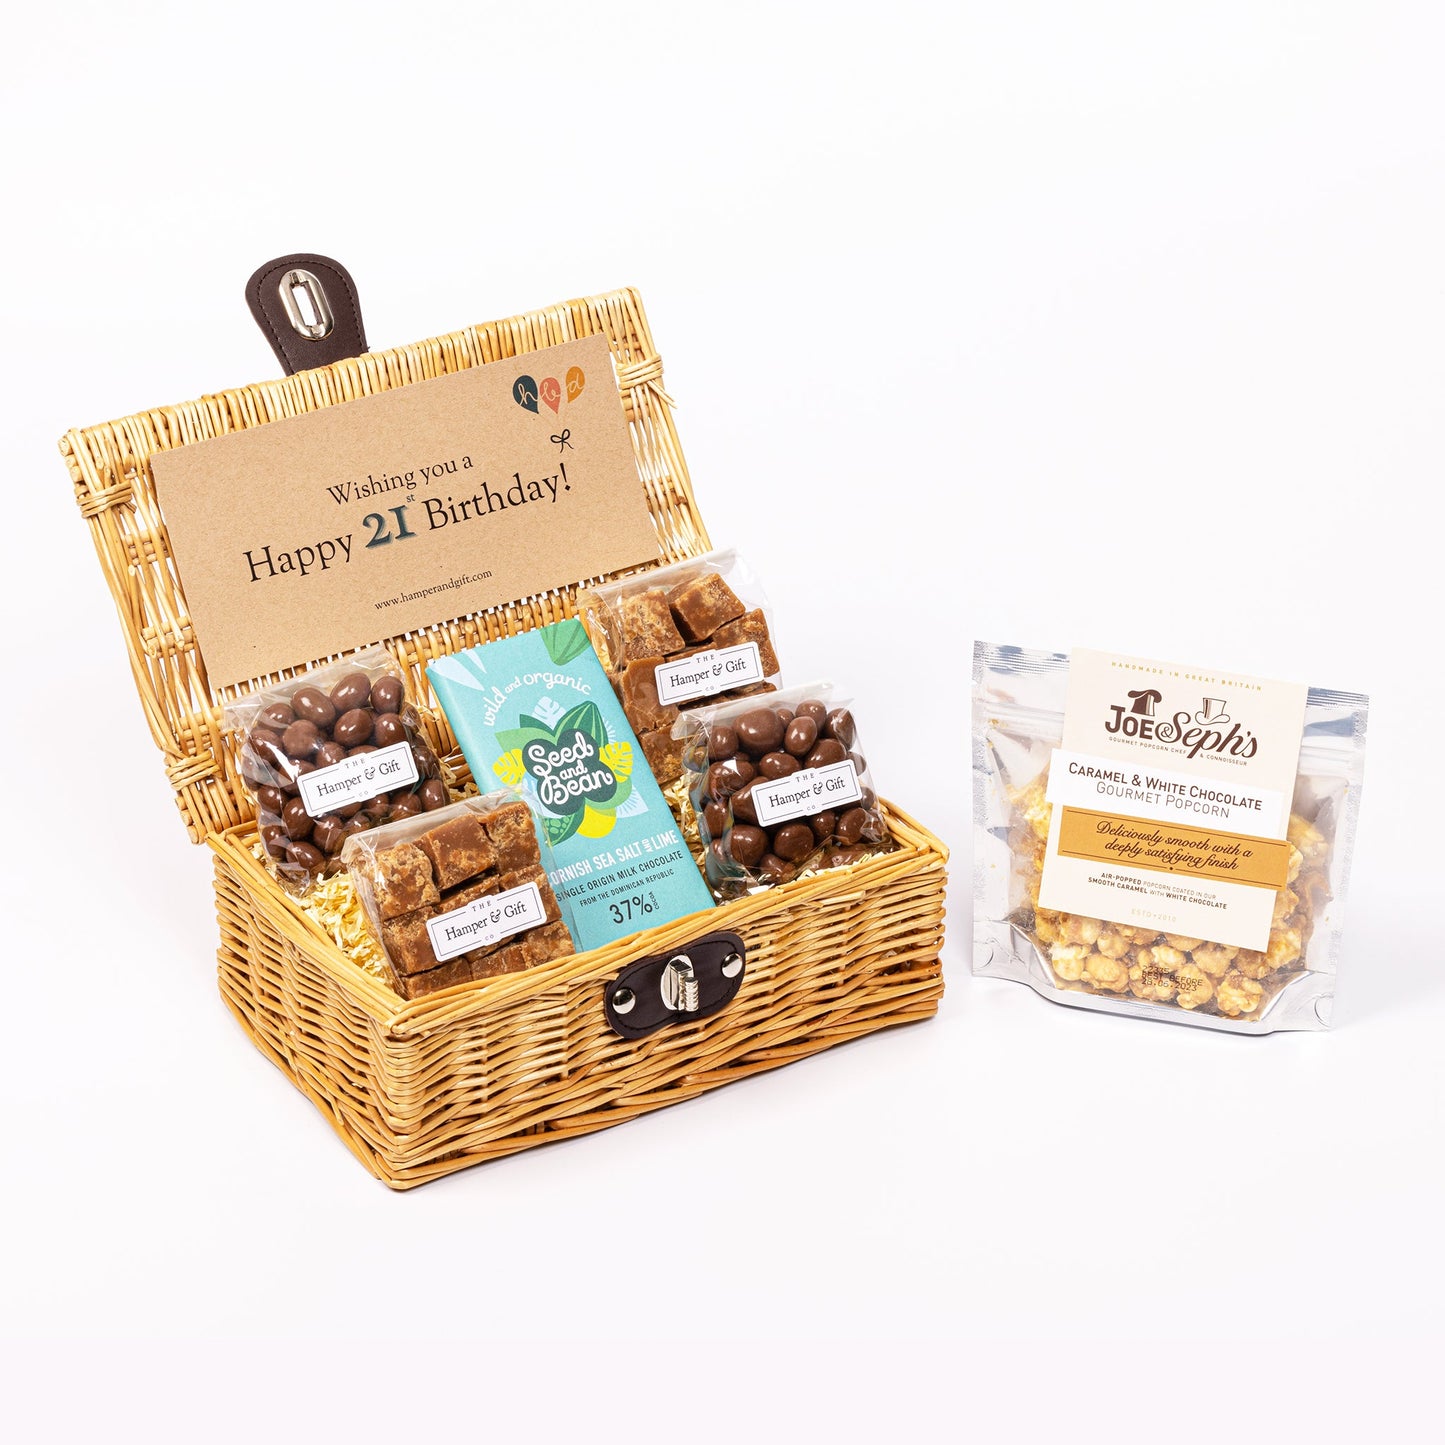 21st Birthday Hamper filled with chocolate, fudge and gourmet popcorn